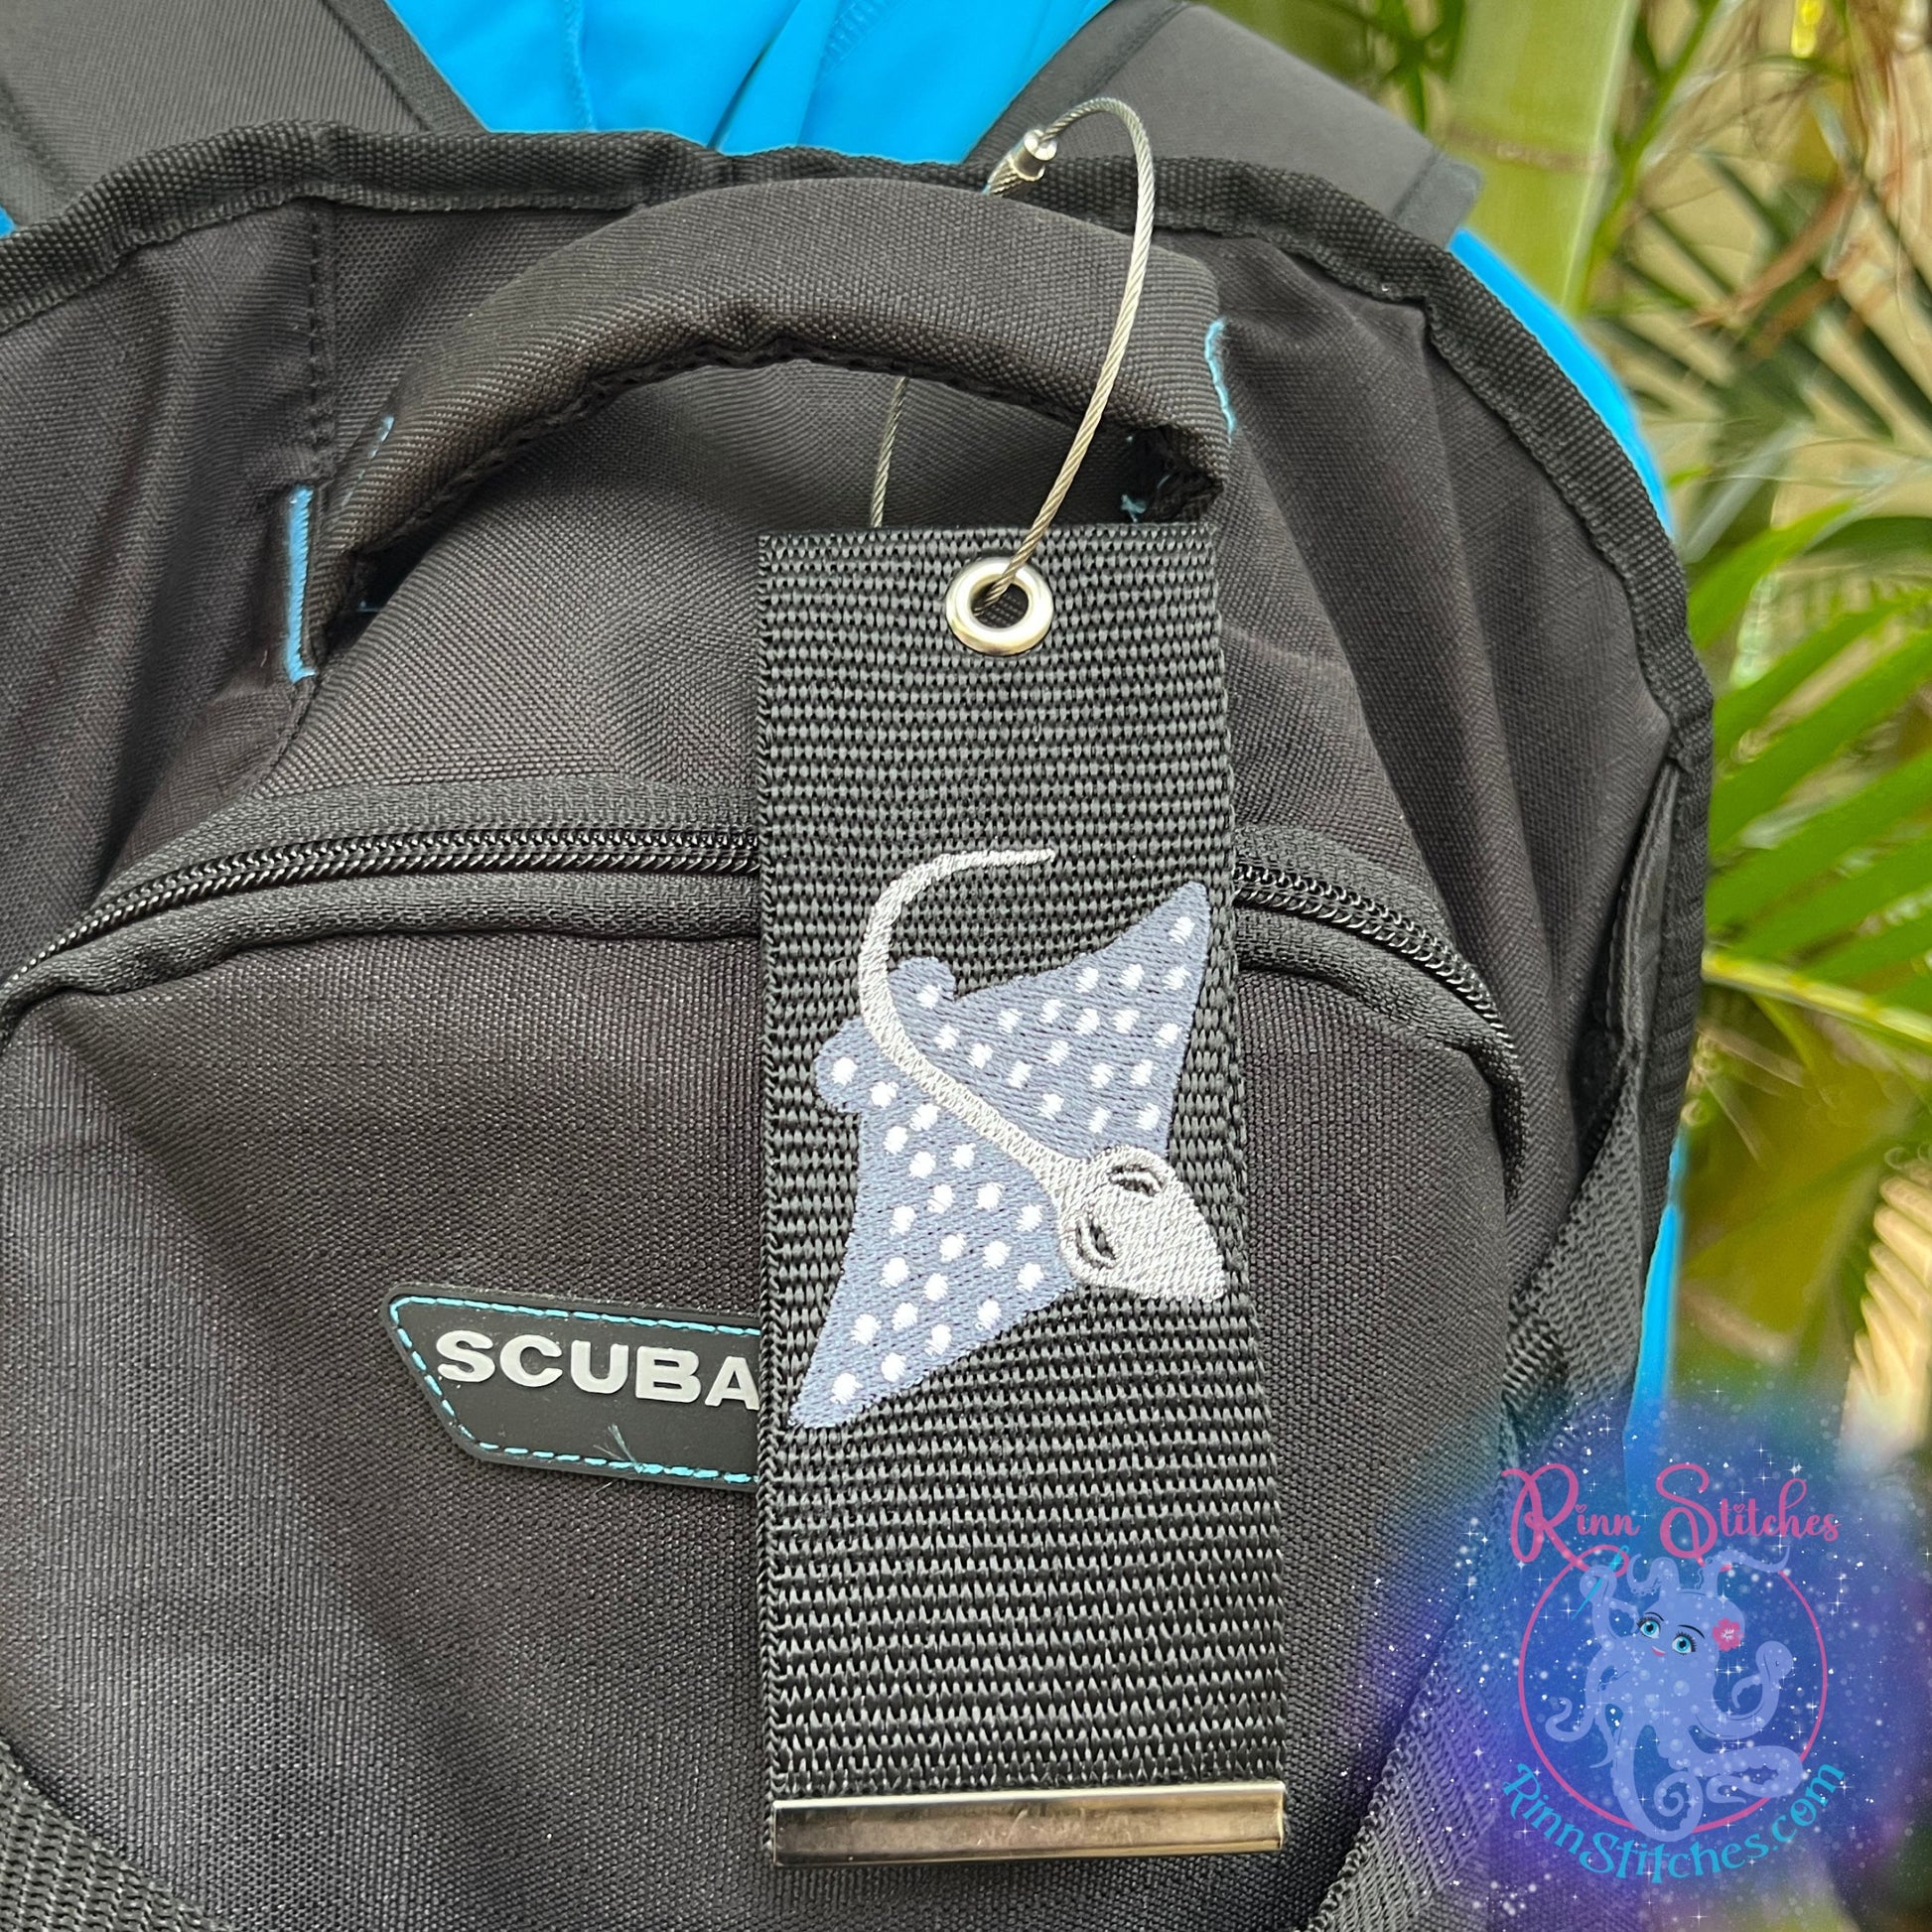 Eagle Ray Luggage Tag, Personalized Embroidered Bag Tag for all your Travel needs by Rinn Stitches Maui, Hawaii